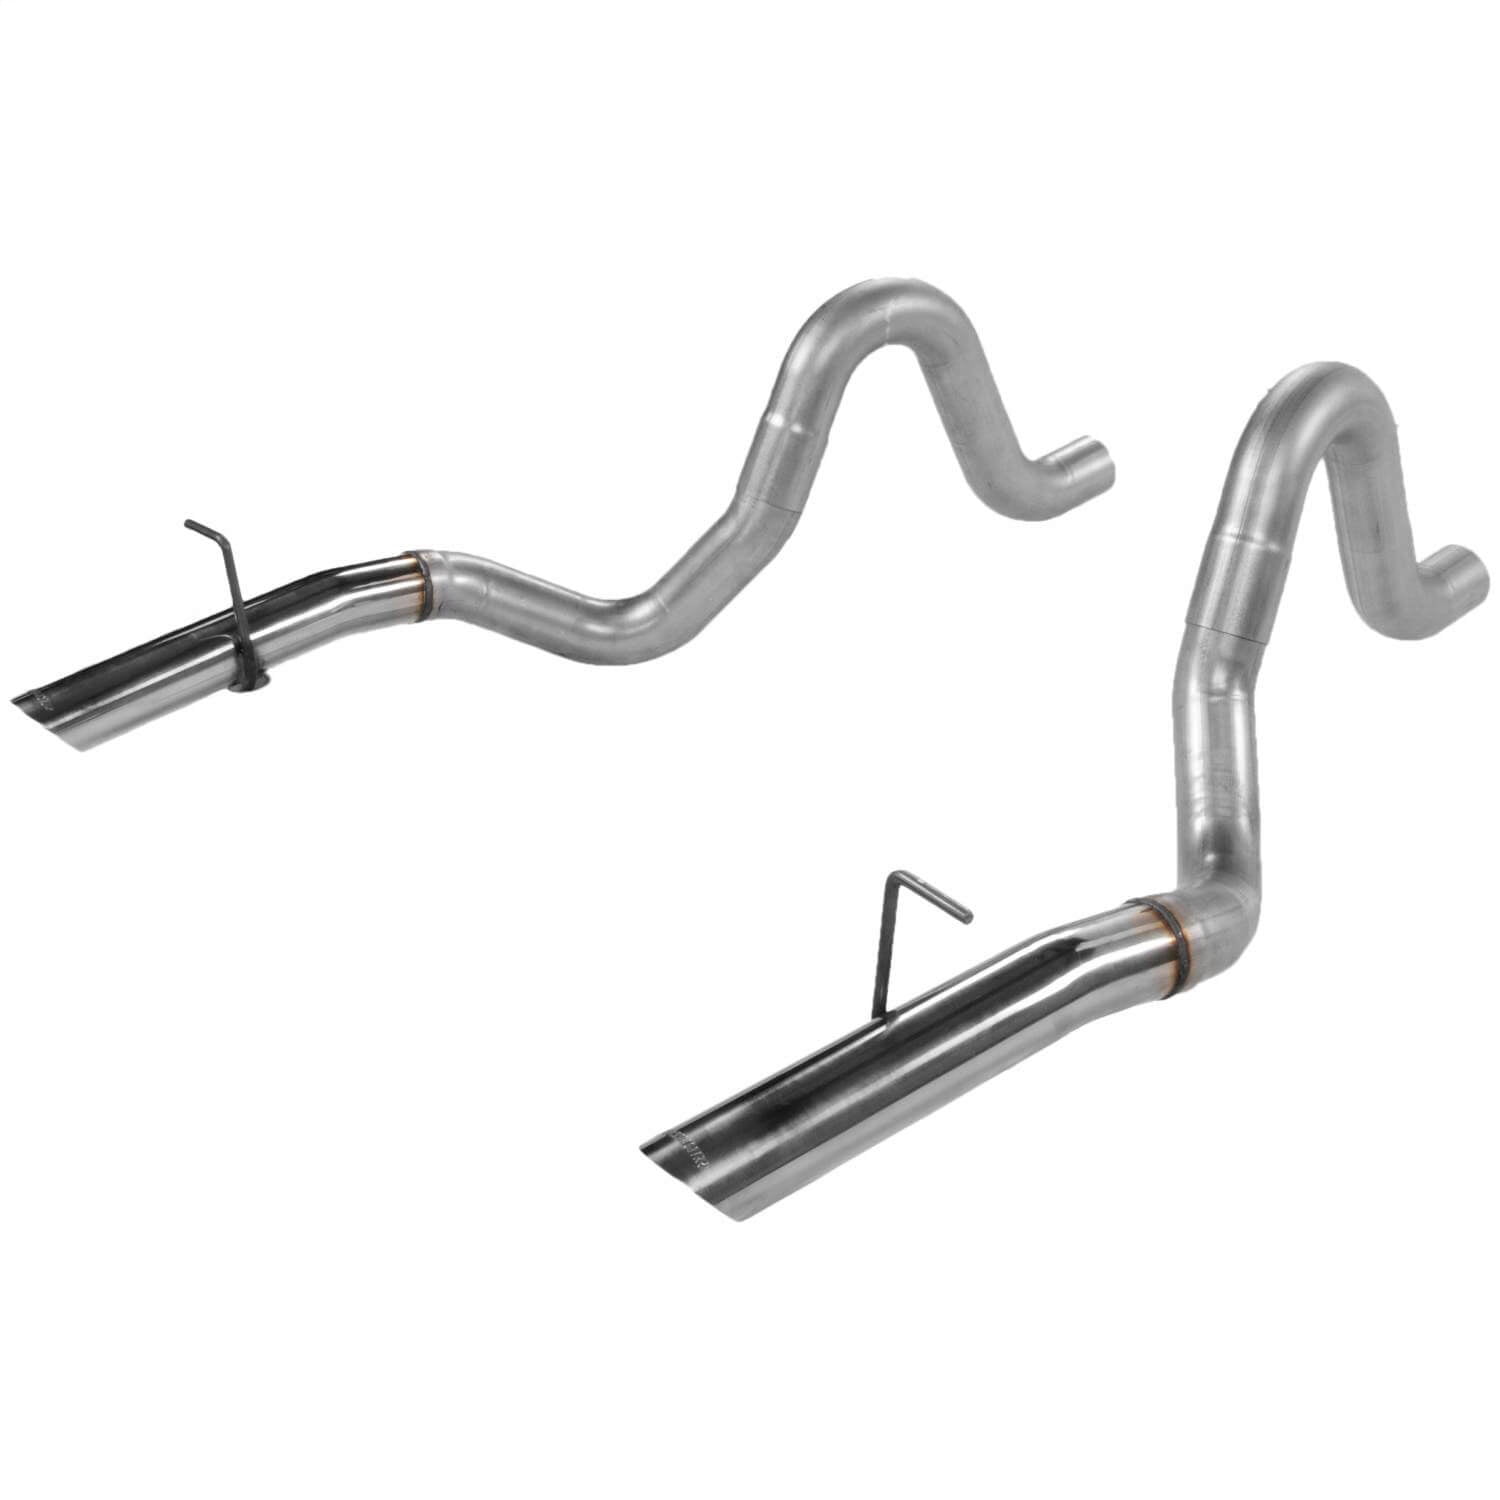 Flowmaster Universal 2.5" 409S Rear Exit 815814 Prebent Tailpipes